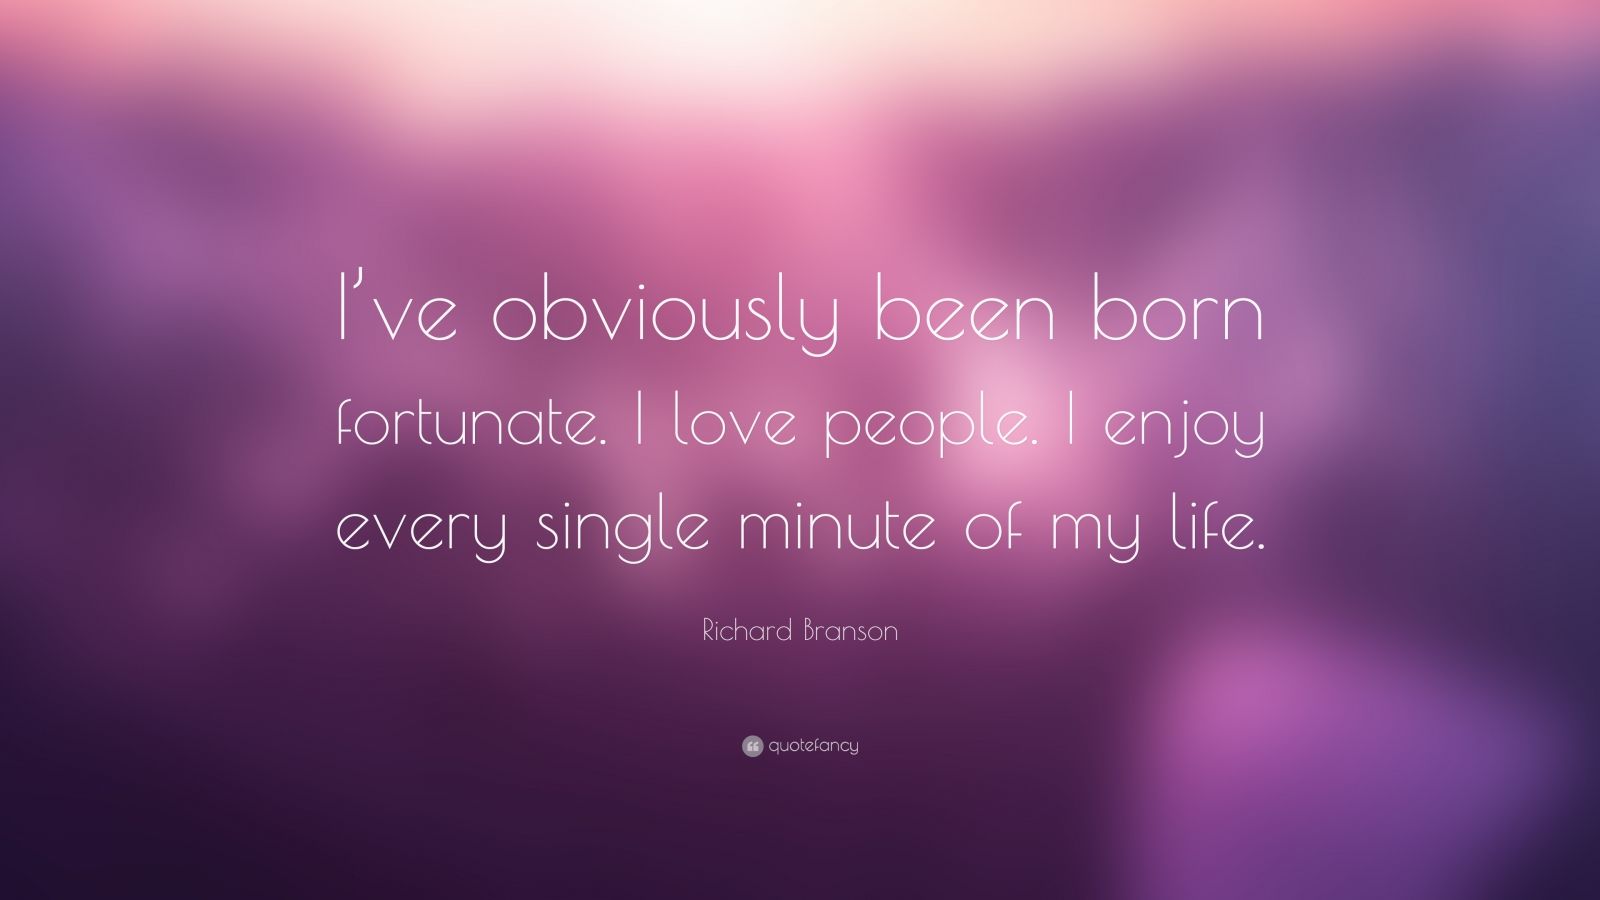 Richard Branson Quote: “I’ve obviously been born fortunate. I love ...